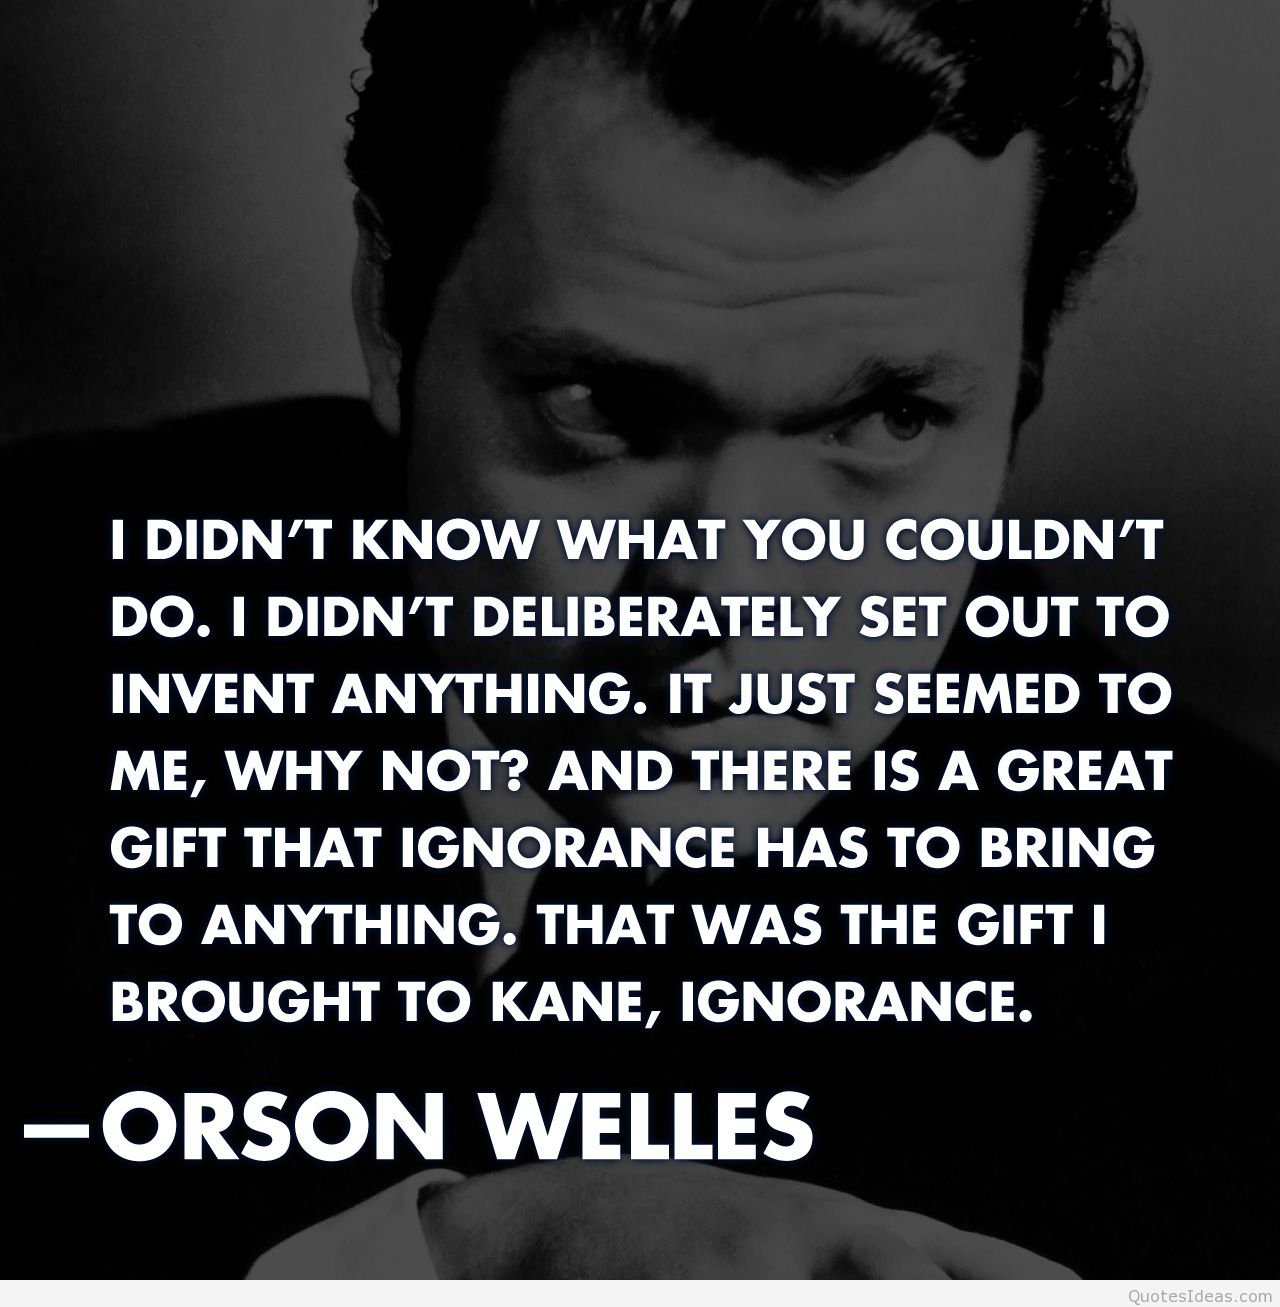 I didn't know what you couldn't do. I didn't deliberately set out to invent anything. It just seemed to me, 'Why not1' There is a great gift that ignorance has to bring ... Orson Welles